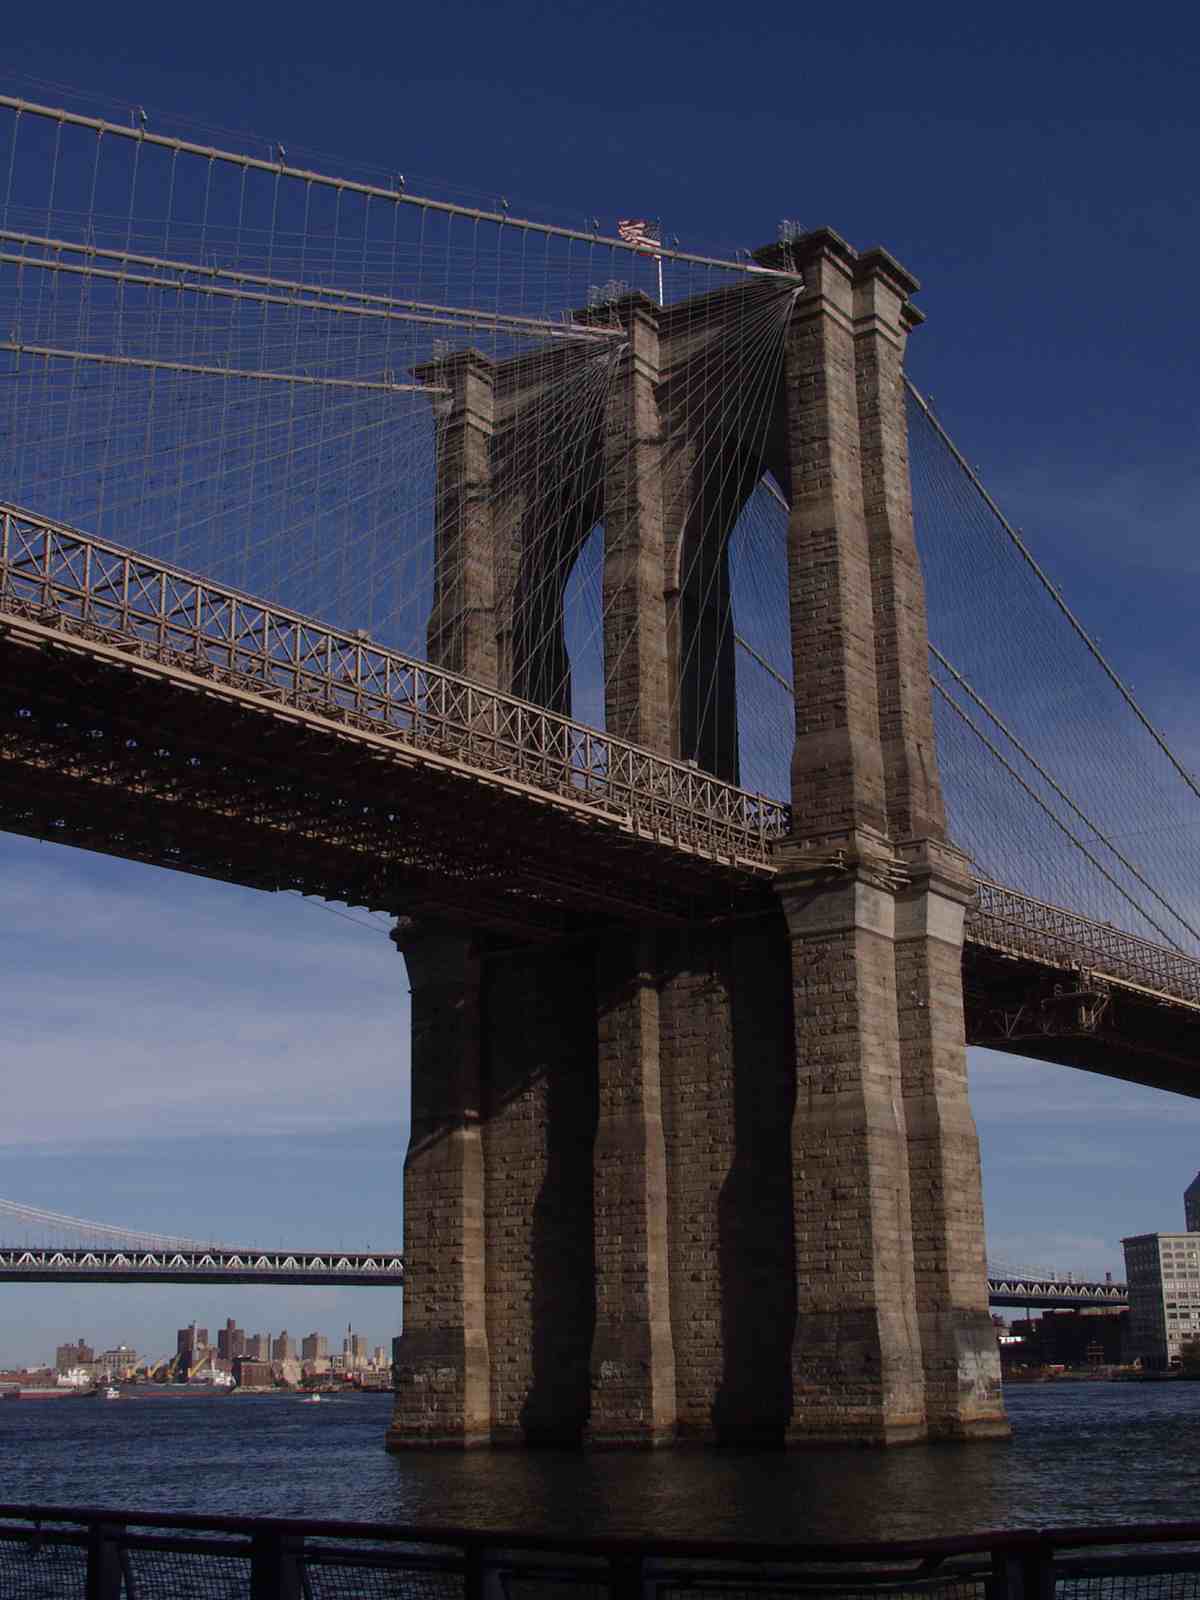 The Brooklyn Bridge is one of the oldest suspension bridges in the United States.